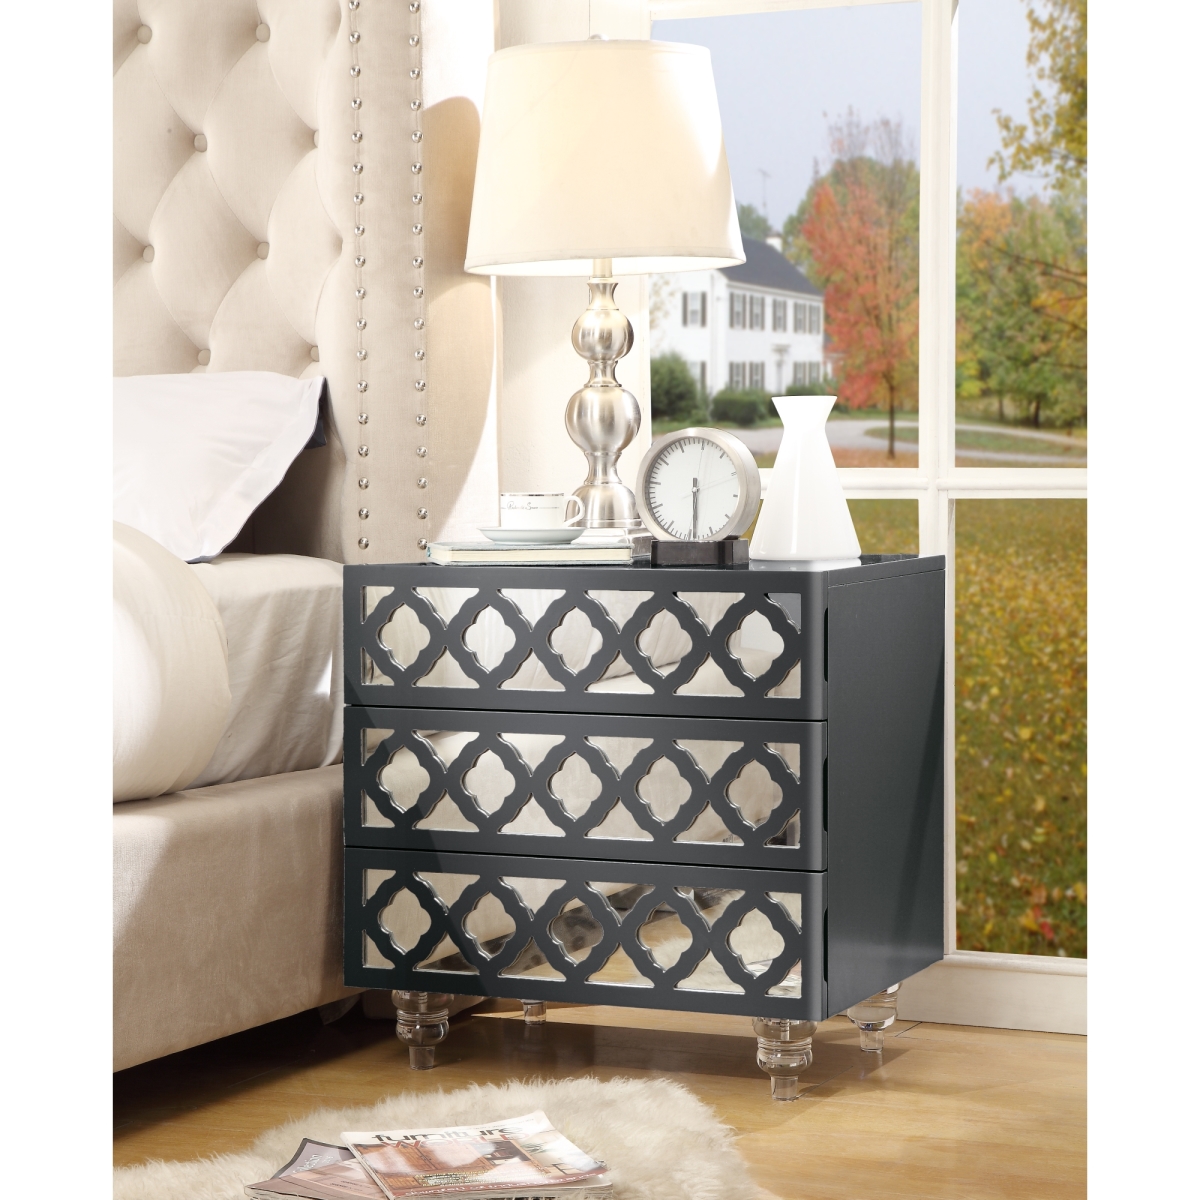 Serenity Mdf Wood Modern Lacquer Lucite Leg Side Table Accent Table & Nightstand - Dark Grey